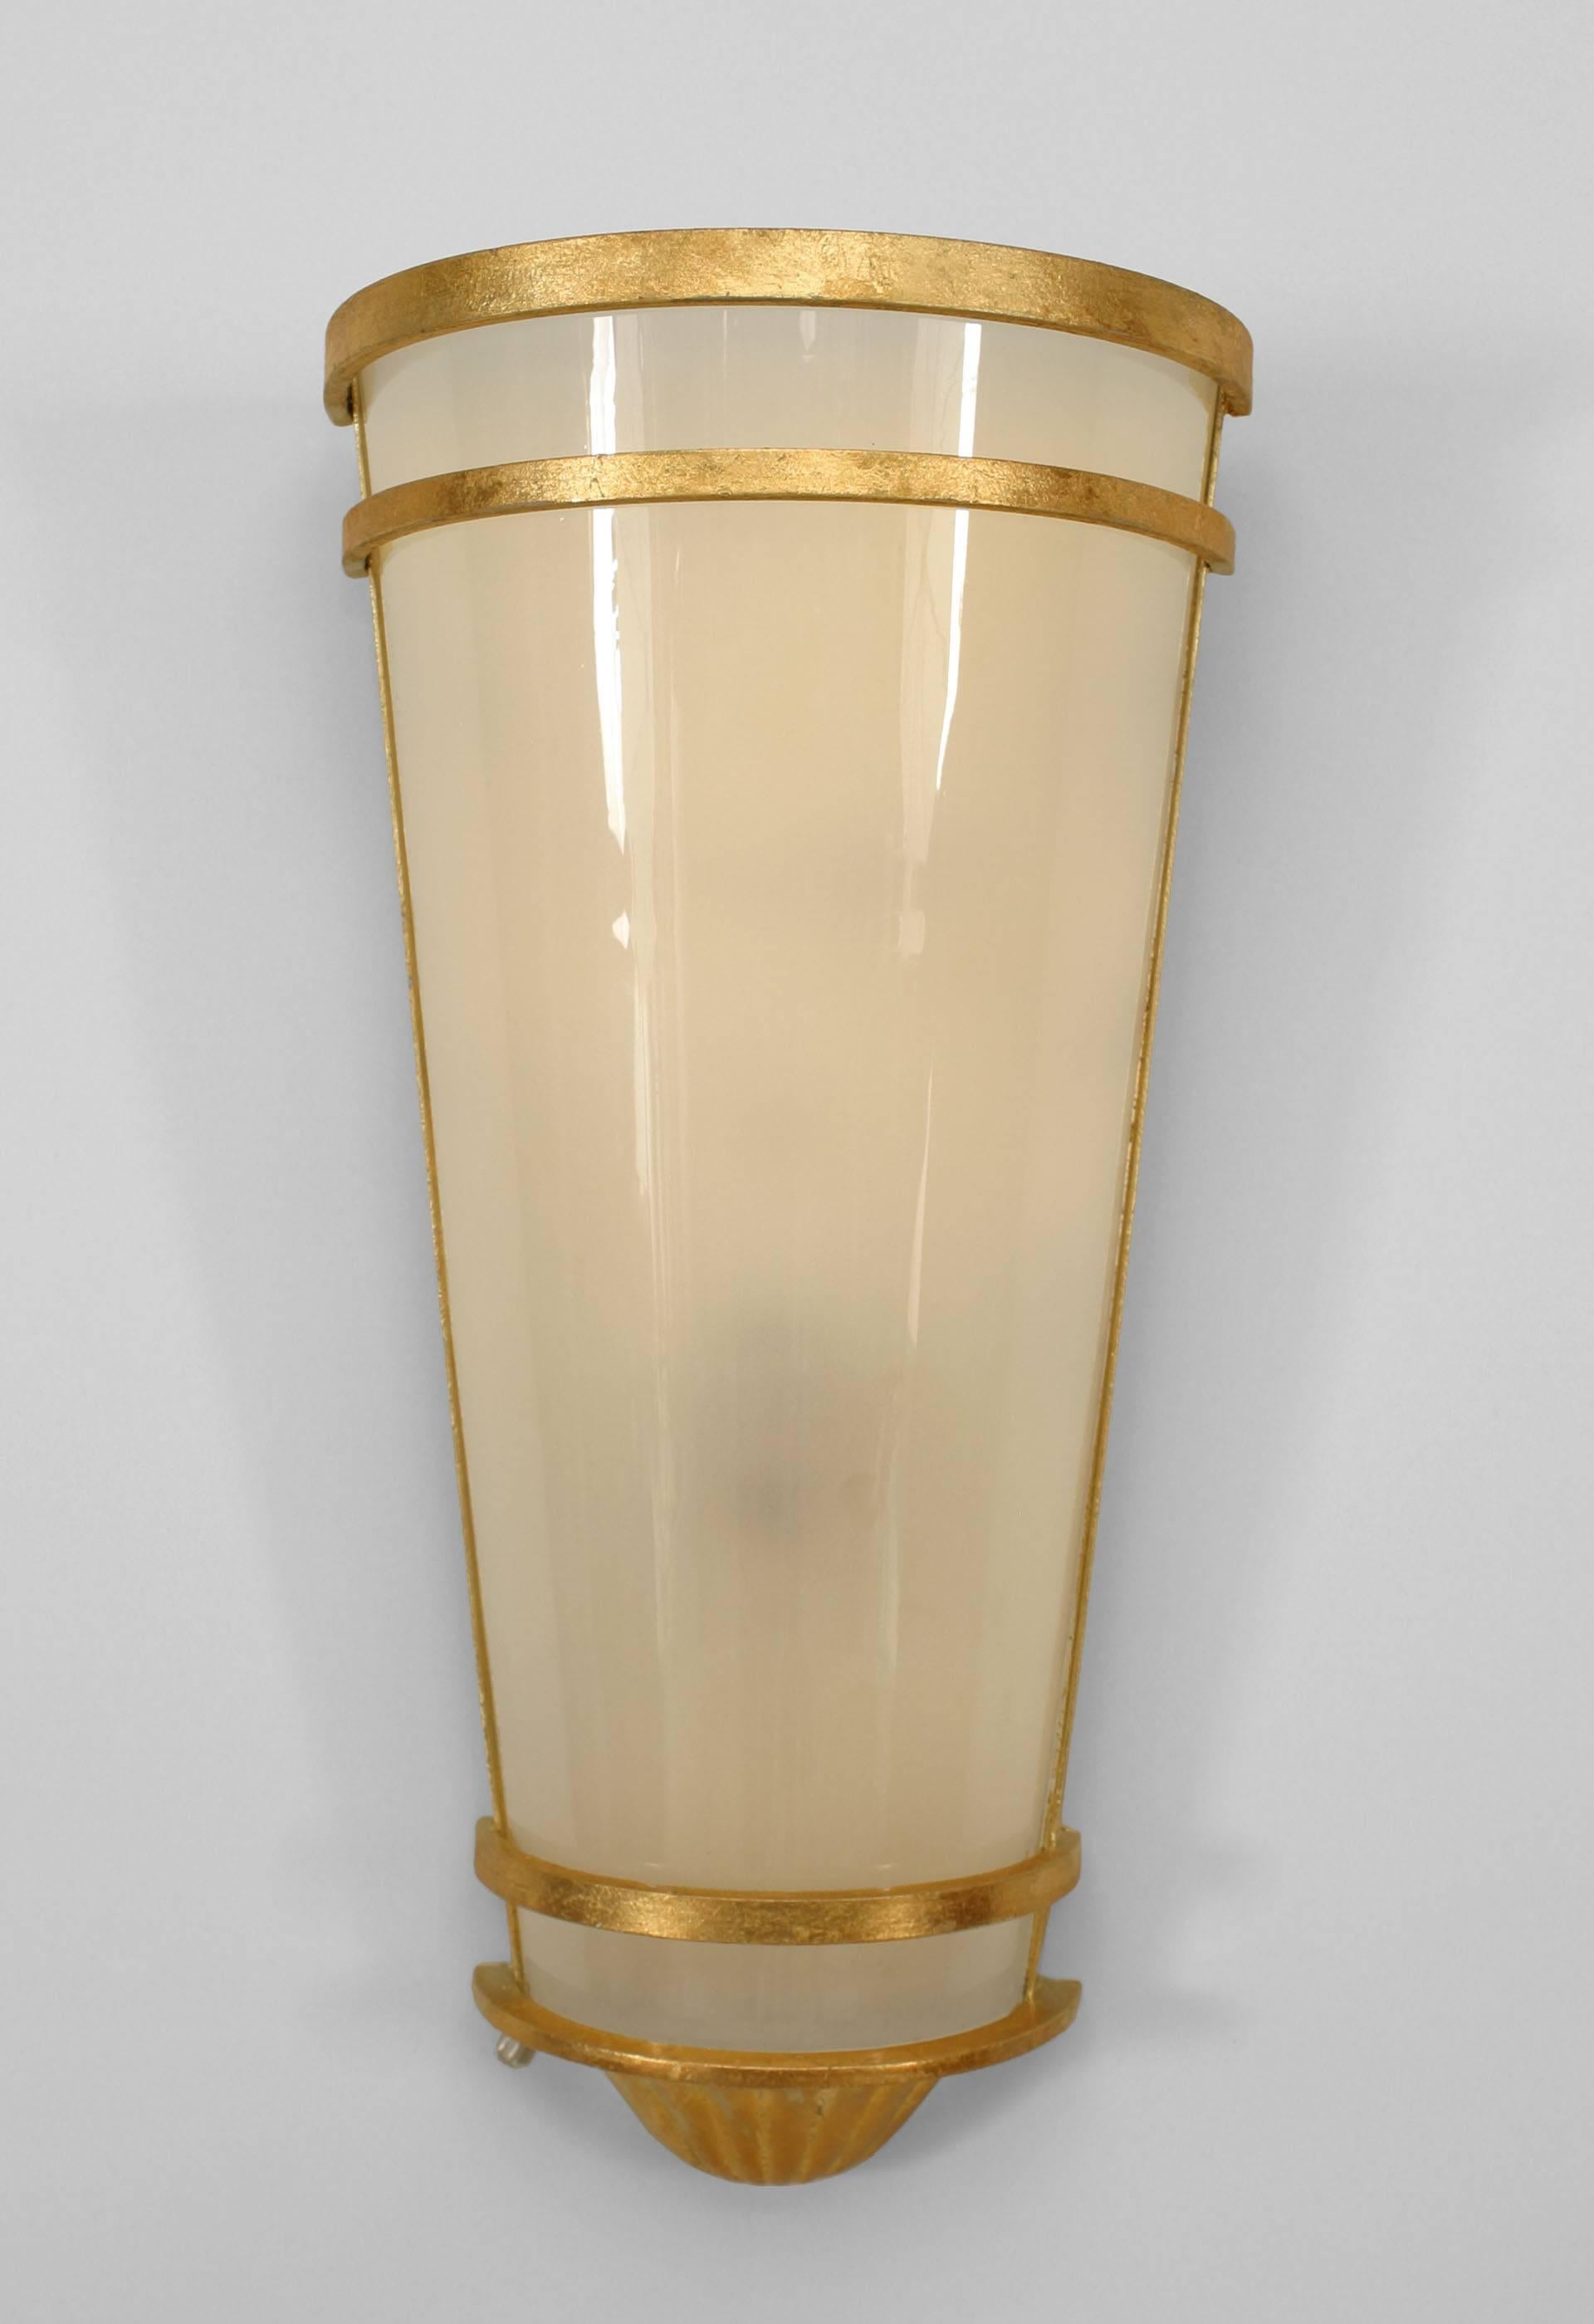 Pair of gilt metal wall sconces with tapered cylindrical shaped frosted shade
(modern).